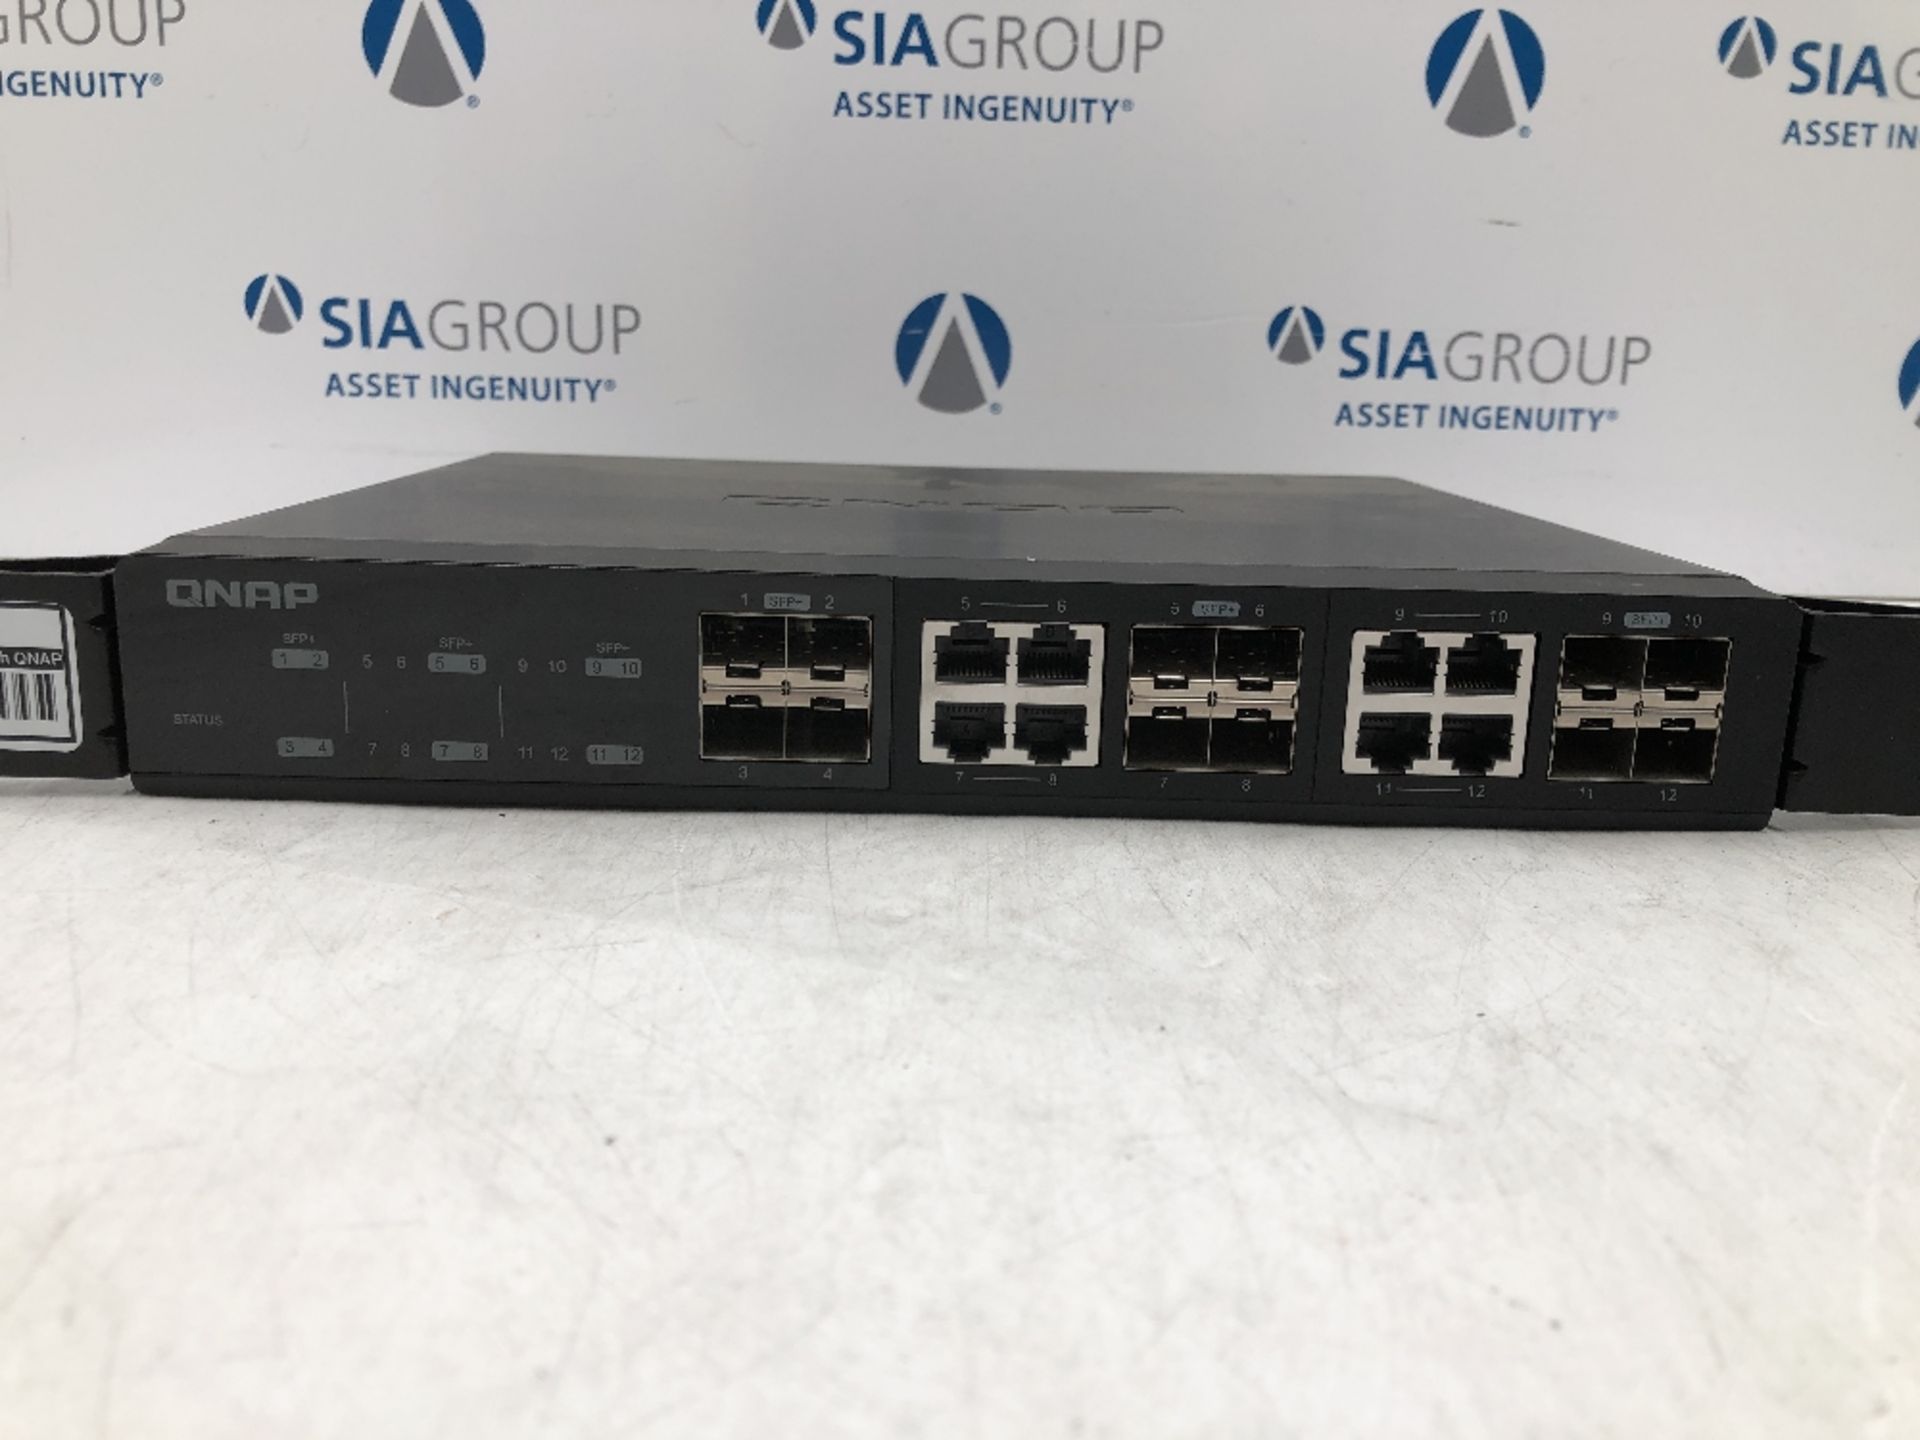 QNAP QSW-1208-8C - 12 Port 10GbE Network Switch - Image 2 of 3